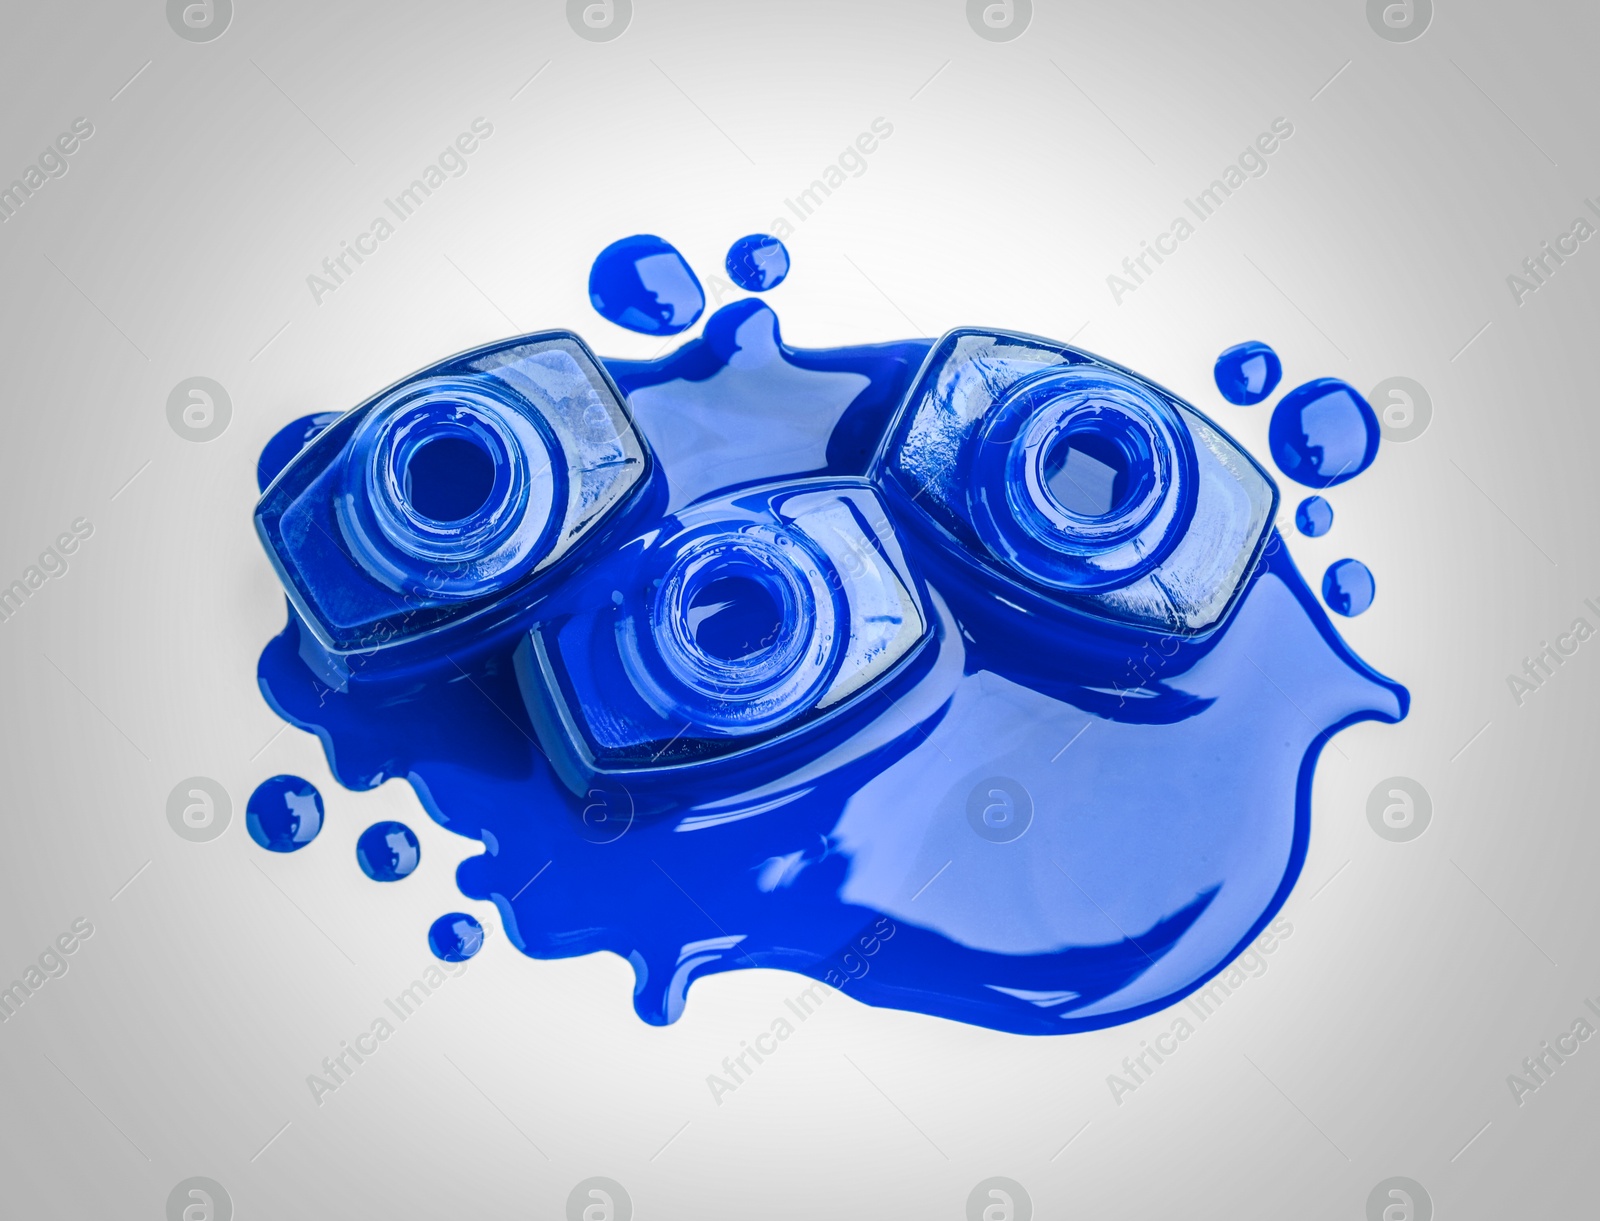 Image of Blue nail polish in bottles on light background, top view